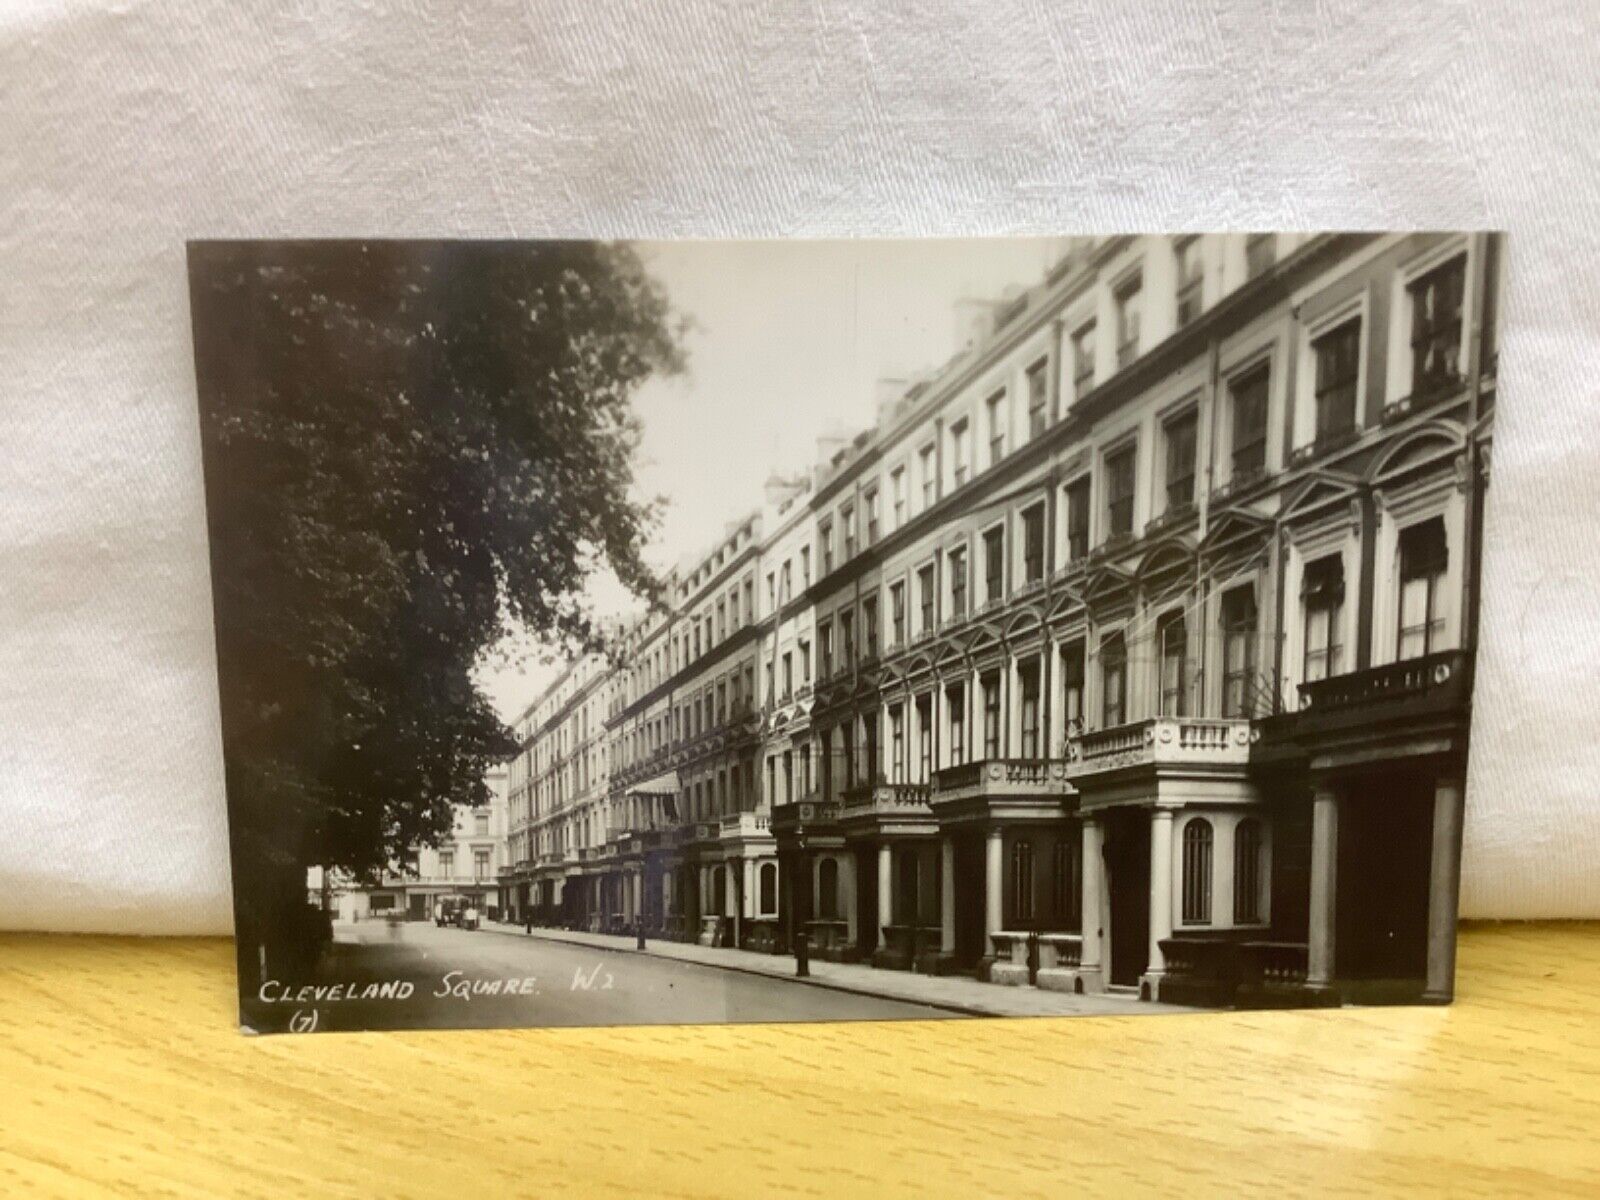 House Clearance - Cleveland Square, W.2., London,  service -unposted